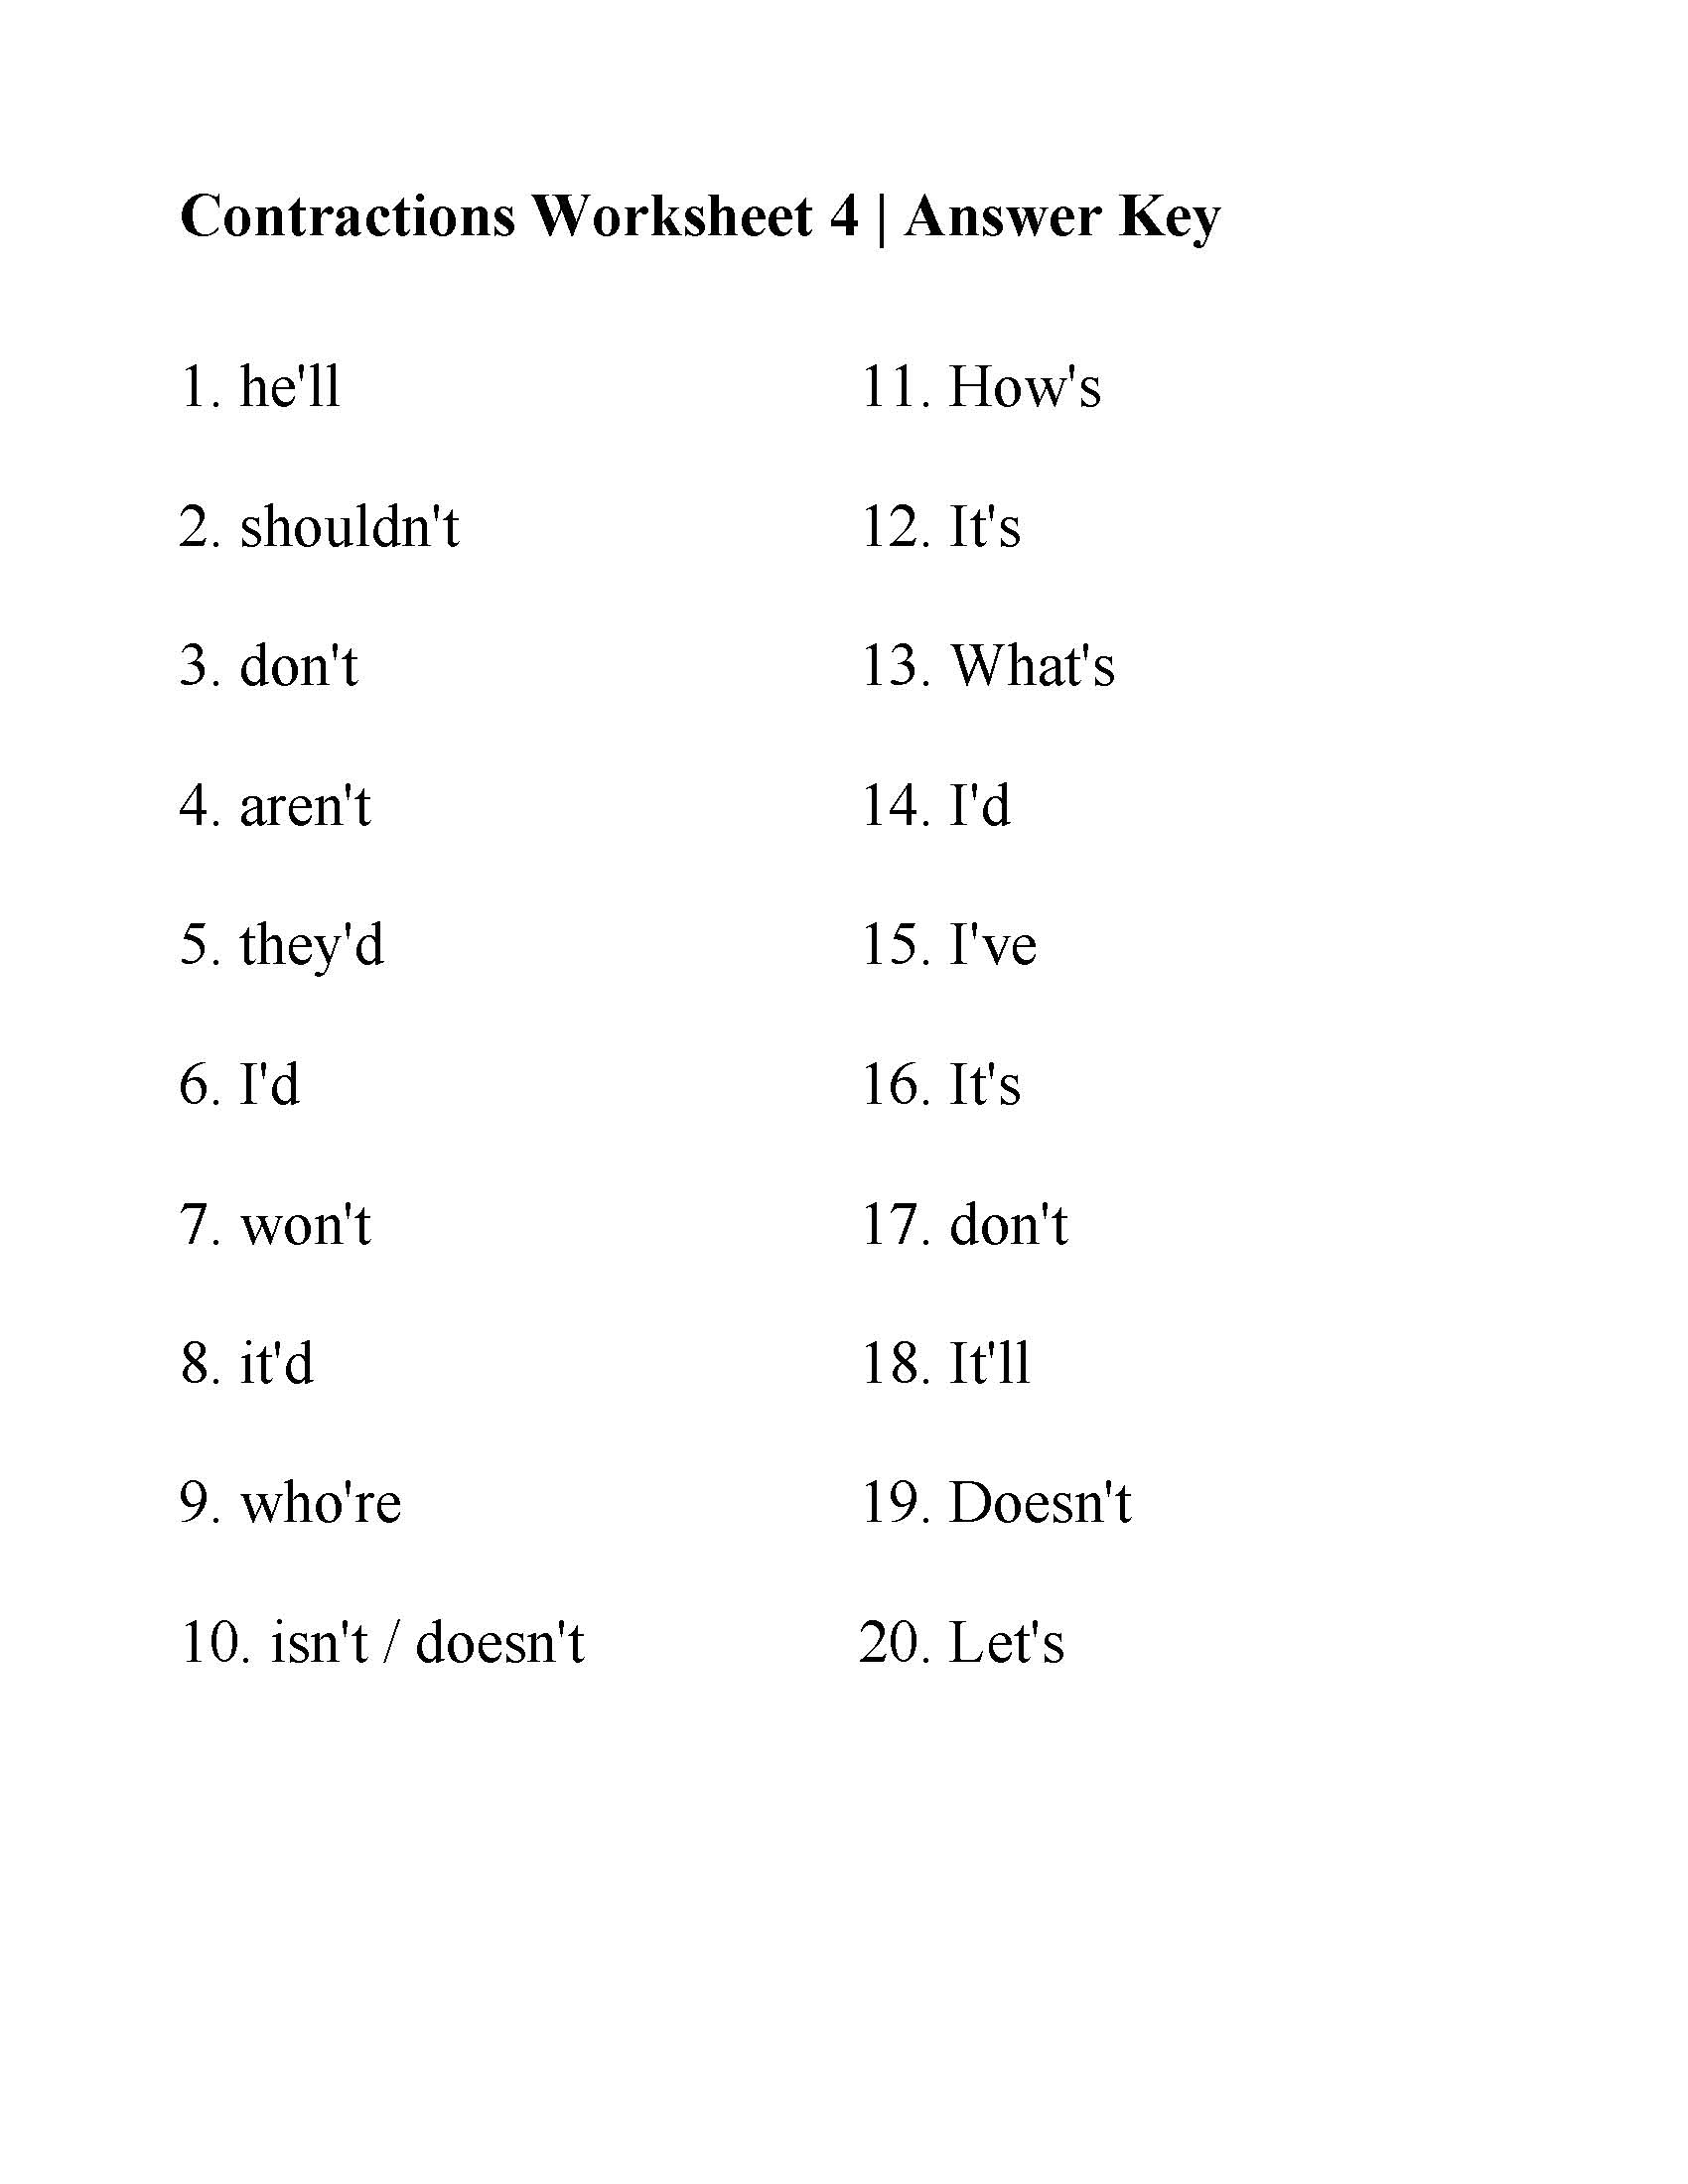 This is a preview image of Contractions Worksheet 4. Click on it to enlarge it or view the source file.